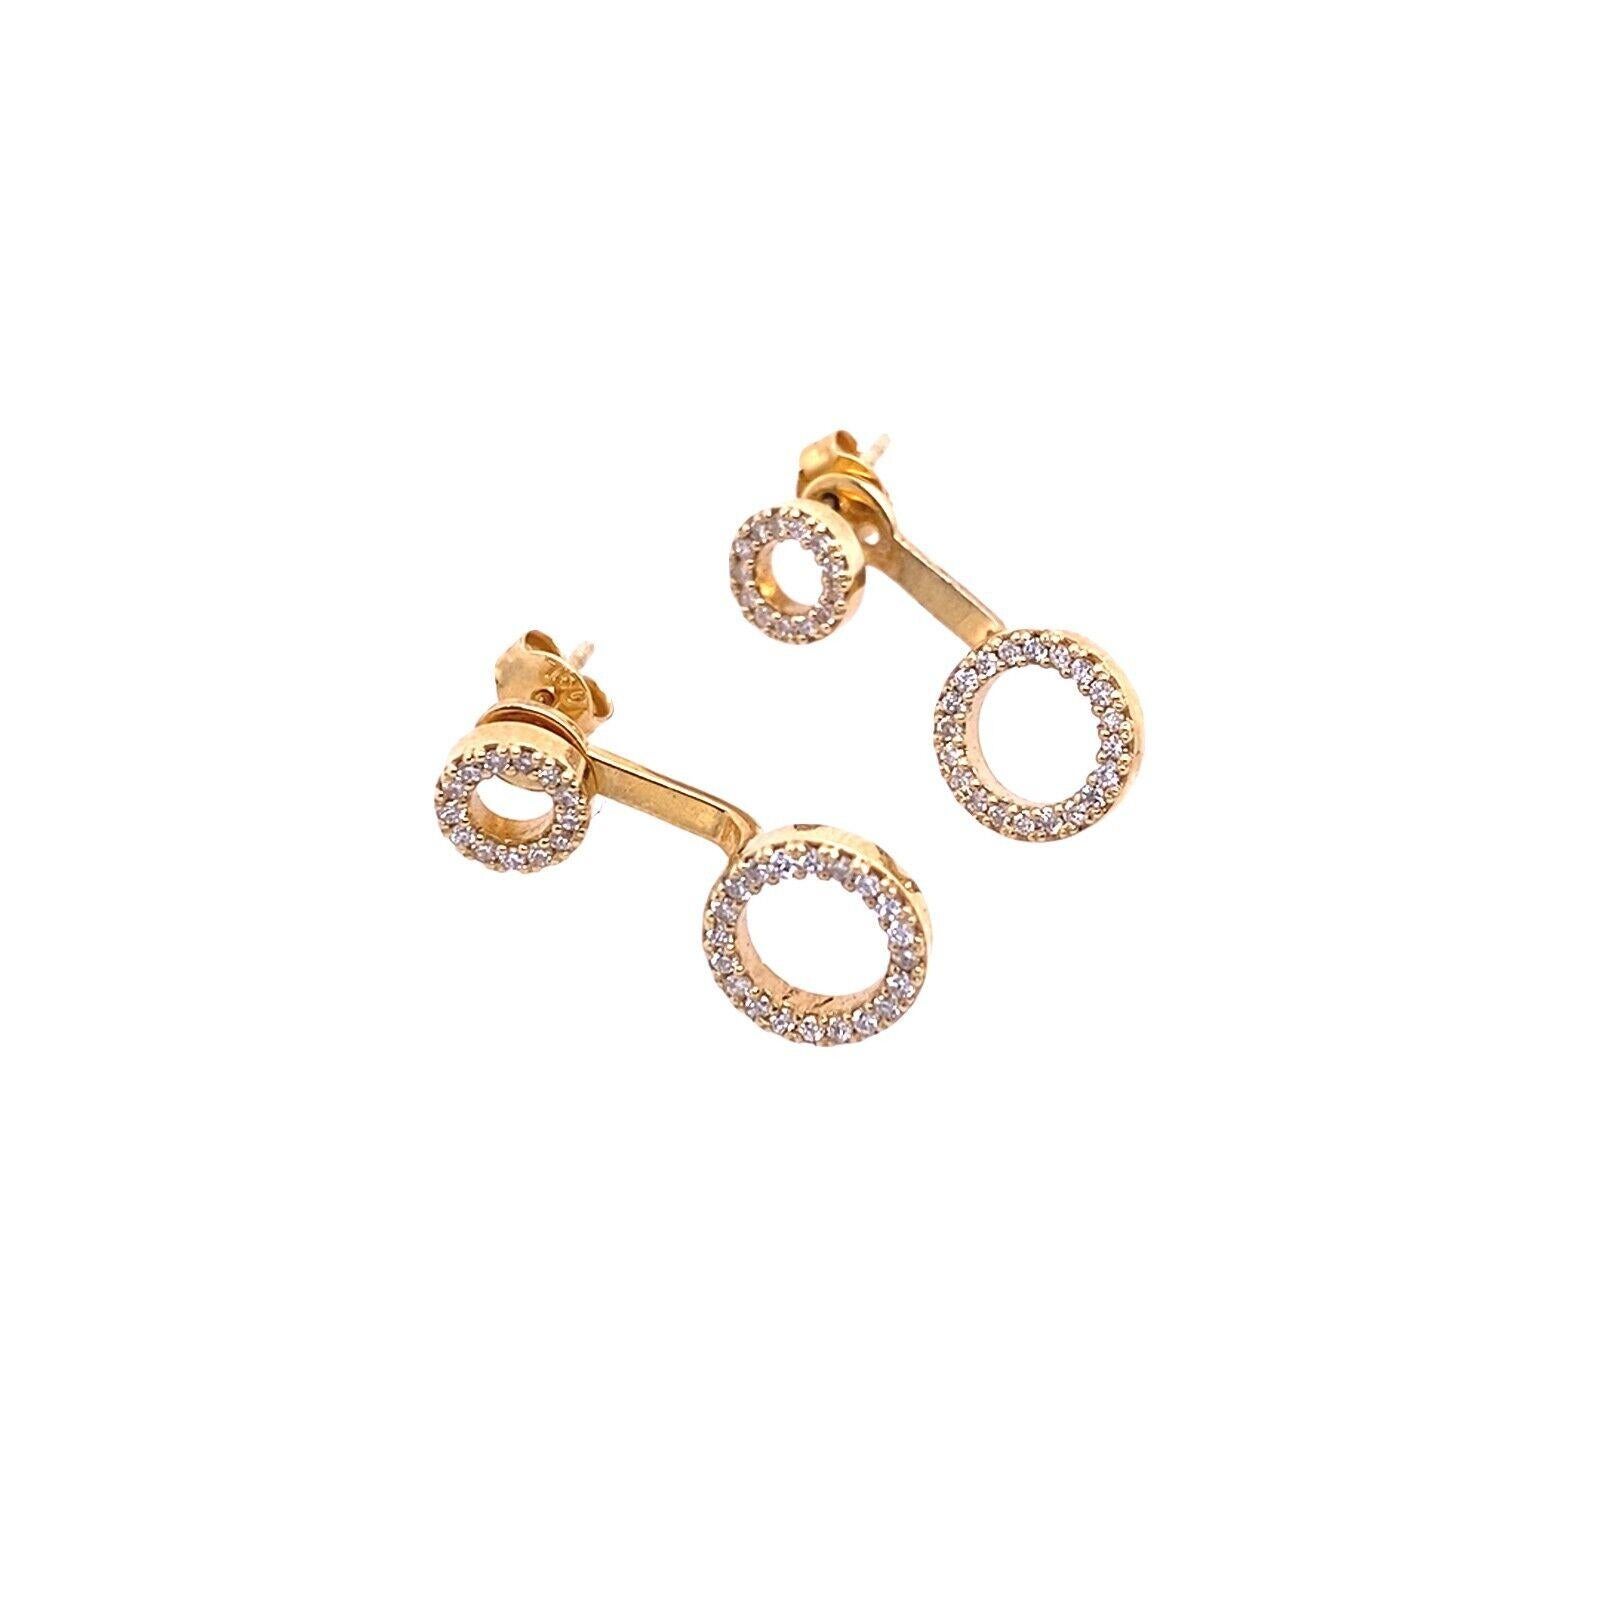 New Fine Quality Drops & Studs Earring with Diamonds in 18ct Yellow Gold

This is a pair of 18ct yellow gold drop & studs Earrings  set with 0.68ct of round brilliant cut diamonds.  These earrings design makes them a good choice for everyday